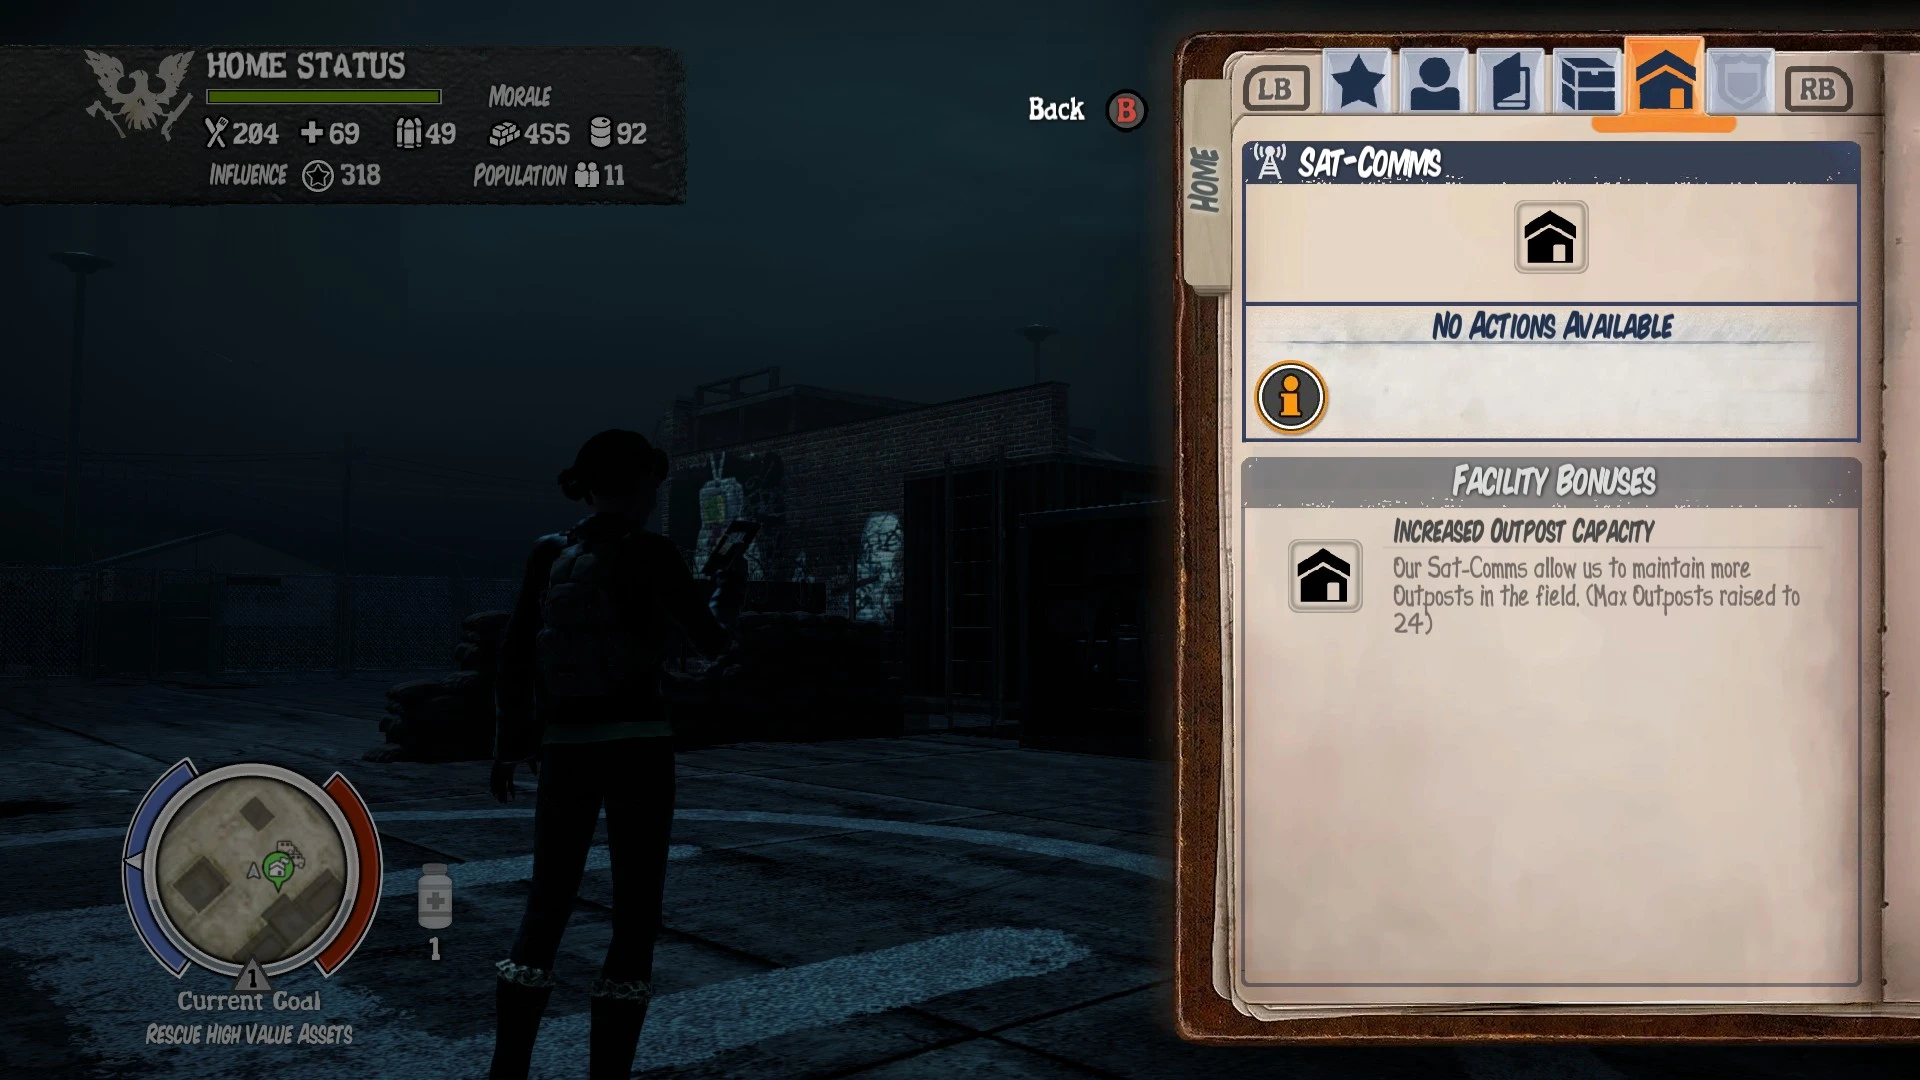 state of decay lifeline mods